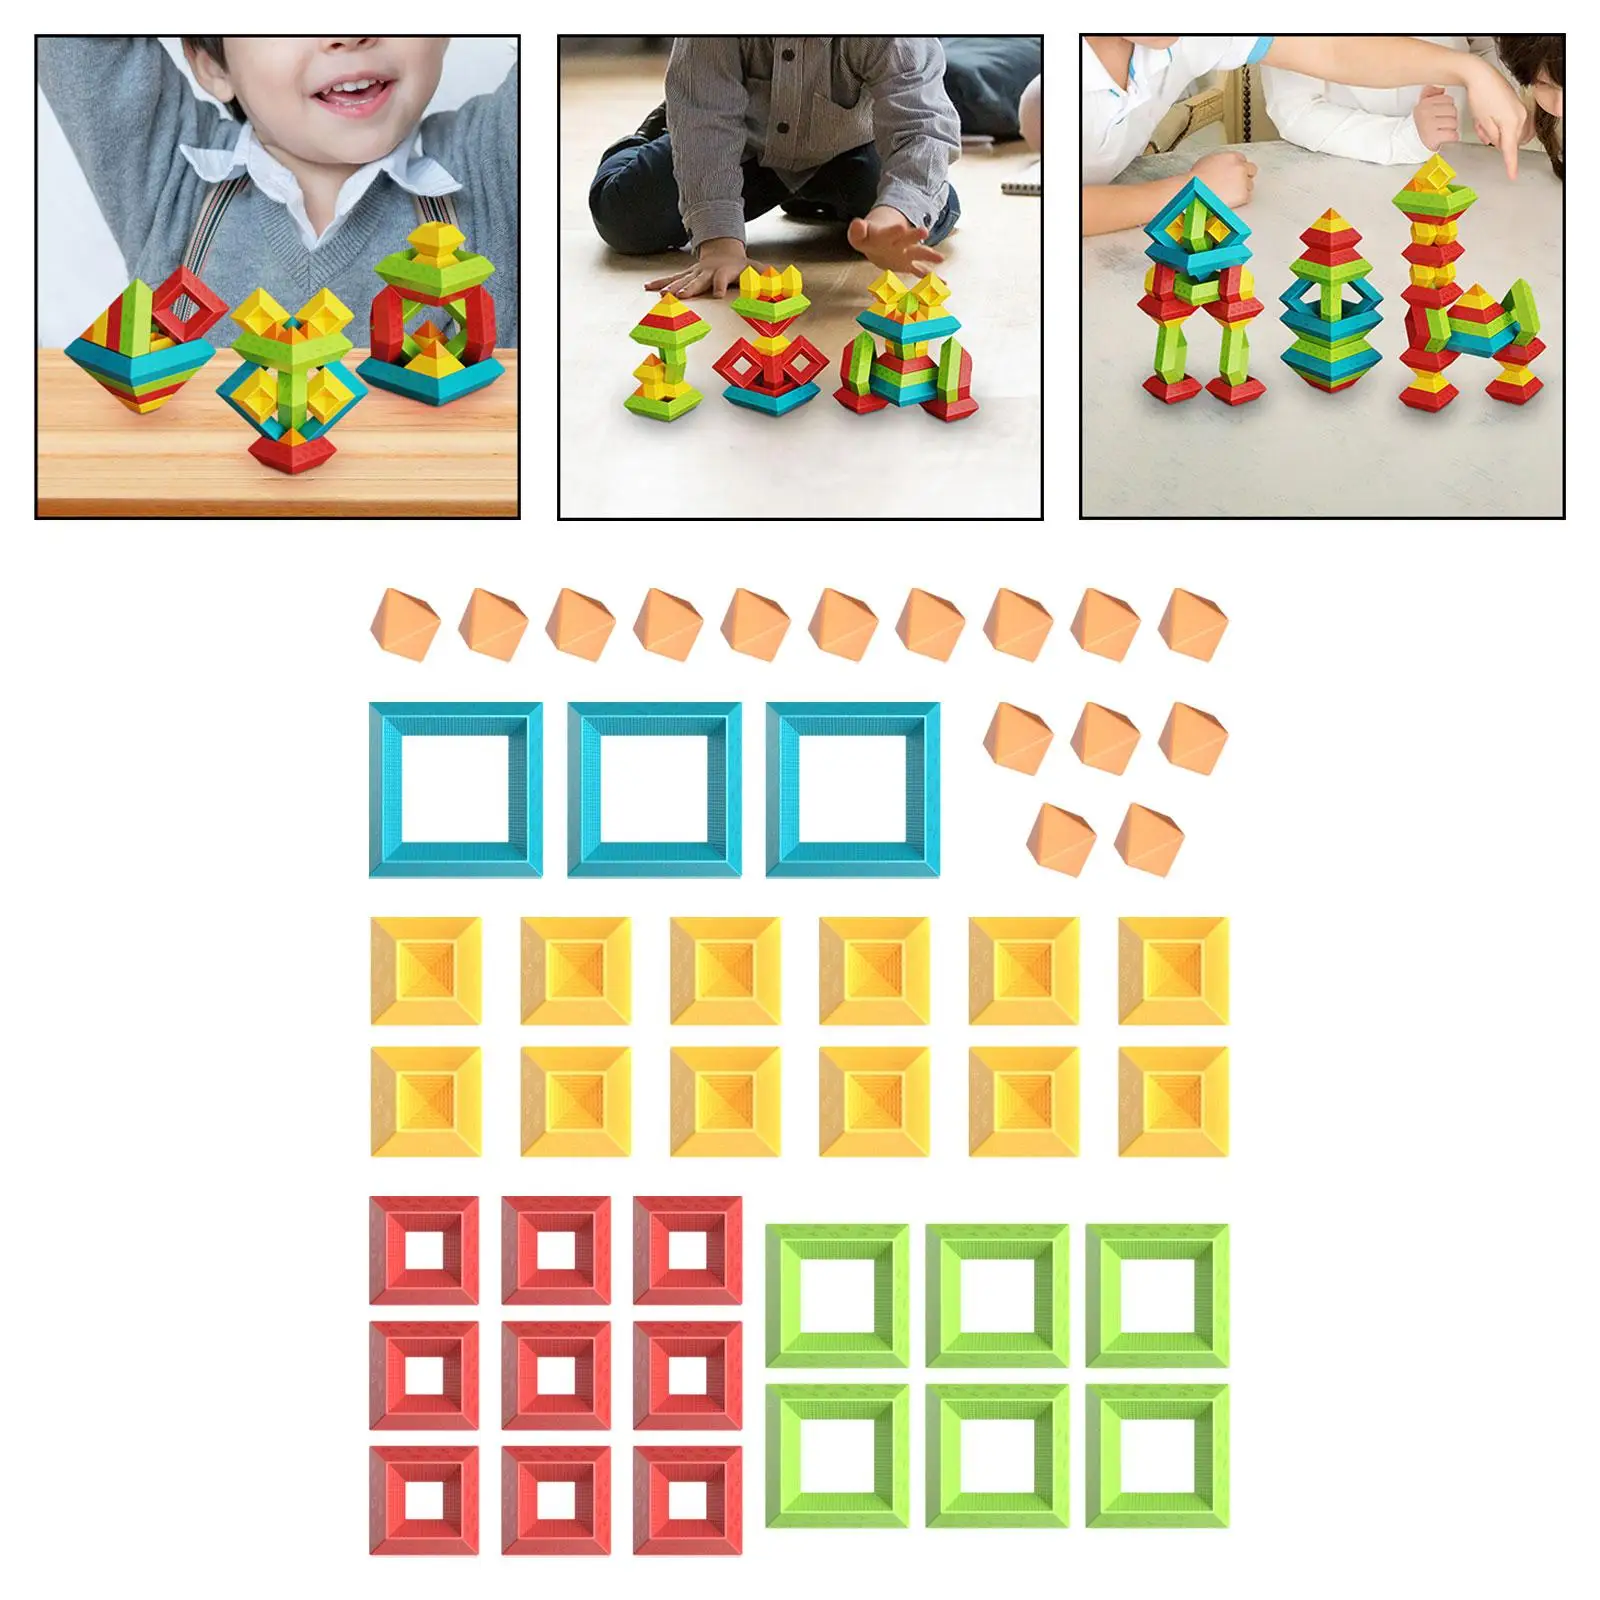 3D Pyramid Building Blocks, Geometric Stacking Toys for Kids, Creative Early Childhood STEM Educational Toys for Preschool